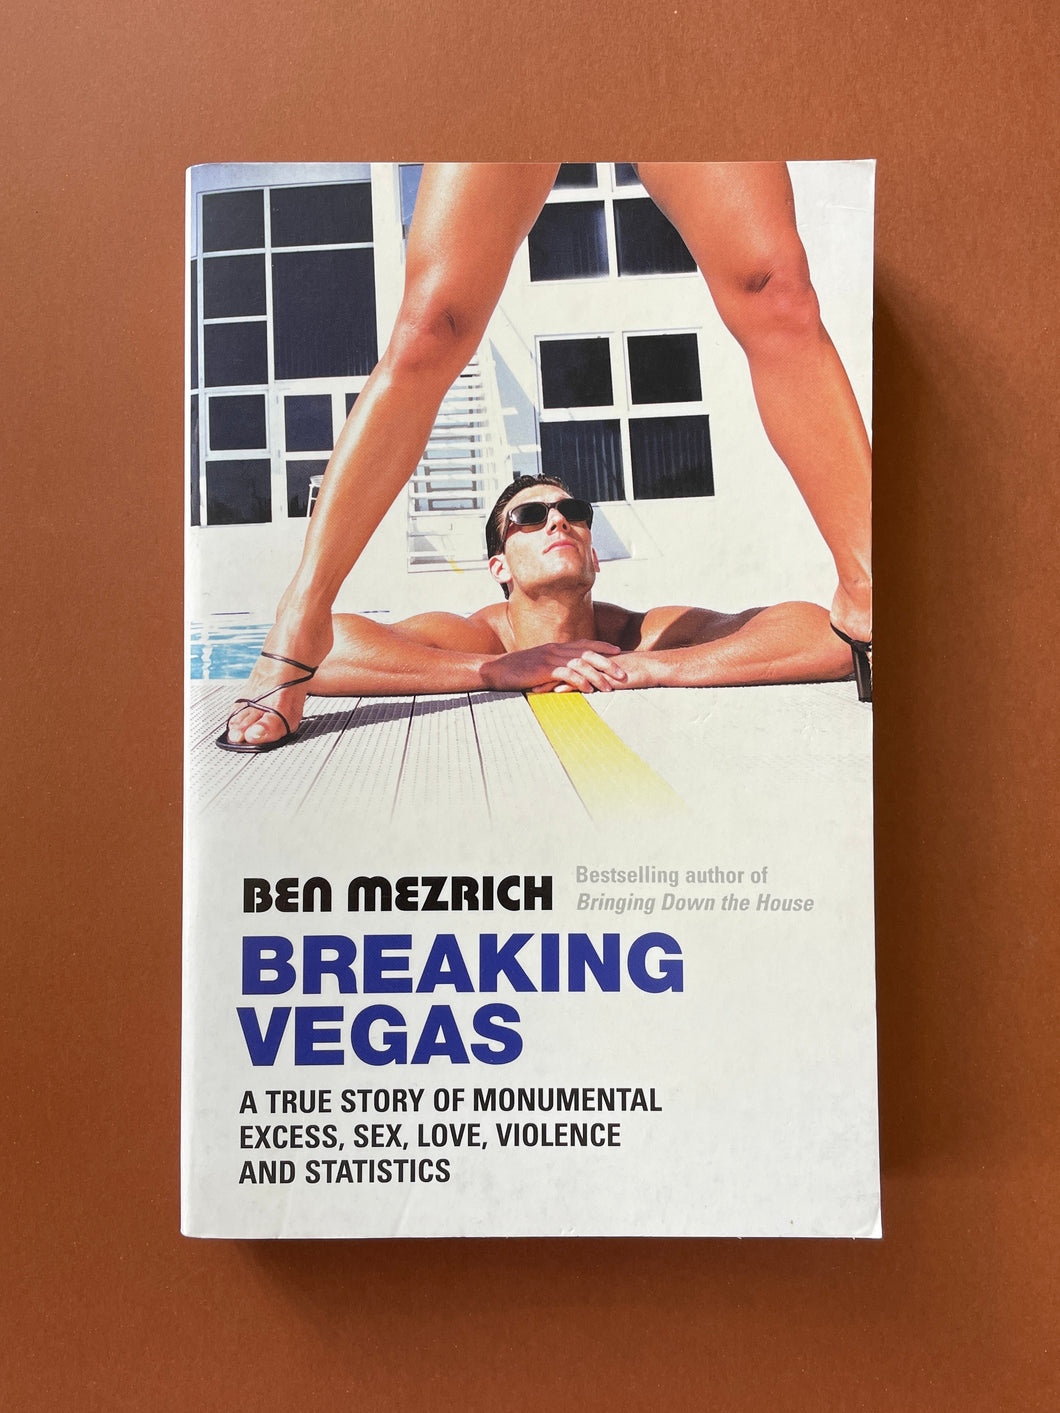 Breaking Vegas by Ben Mezrich: photo of the front cover which shows very minor scuff marks along the edges.